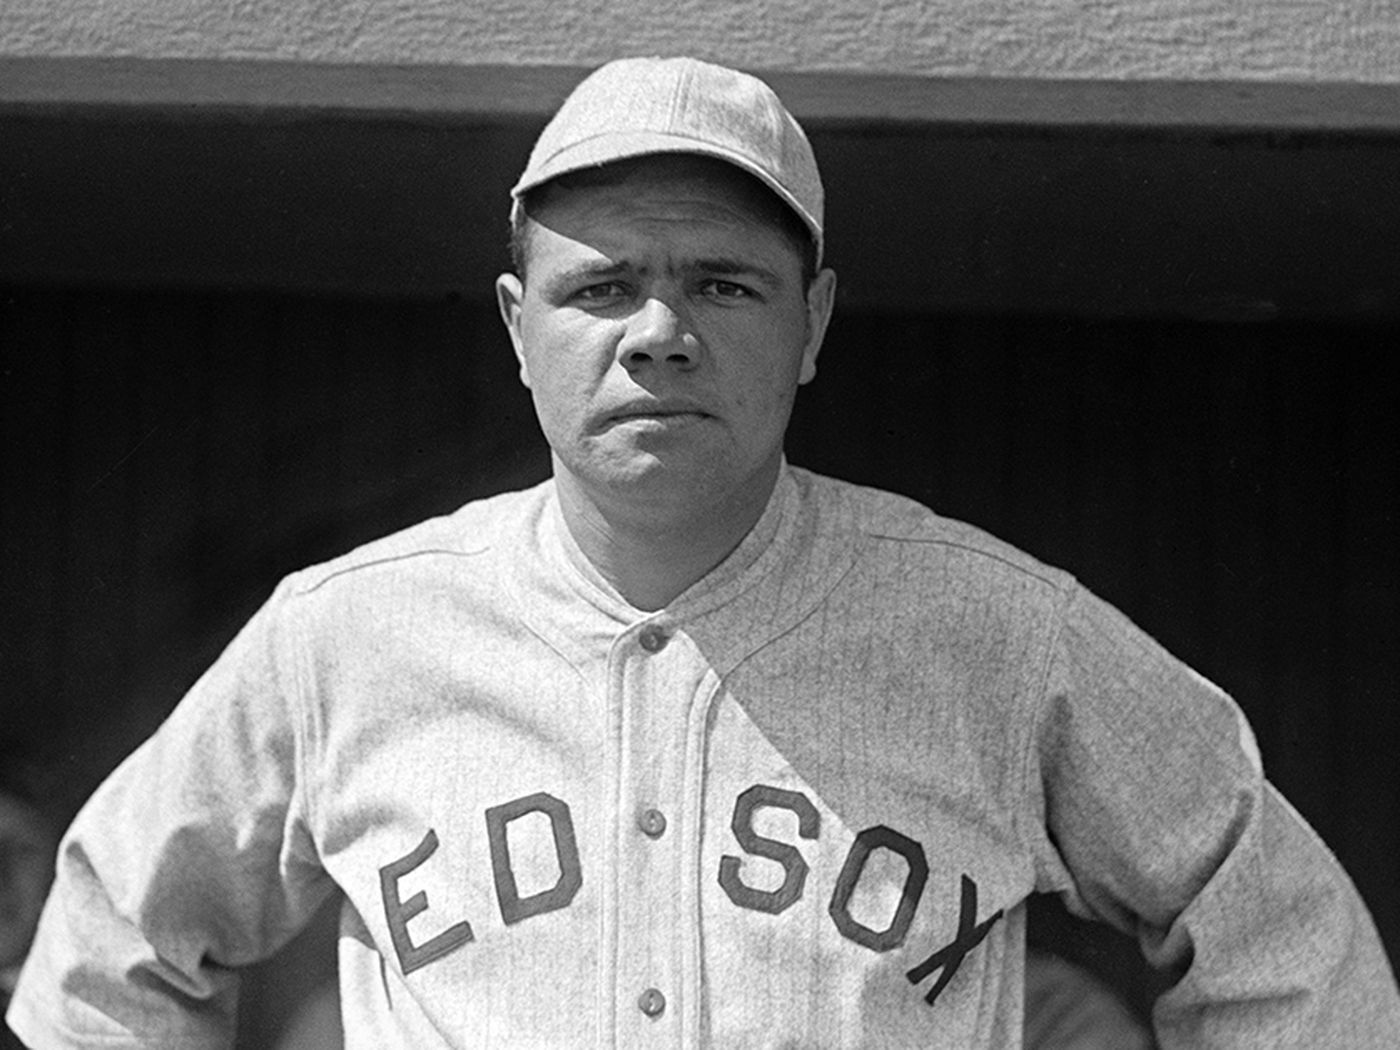 Babe Ruth, wearing a Red Sox uniform, looks squarely at the camera